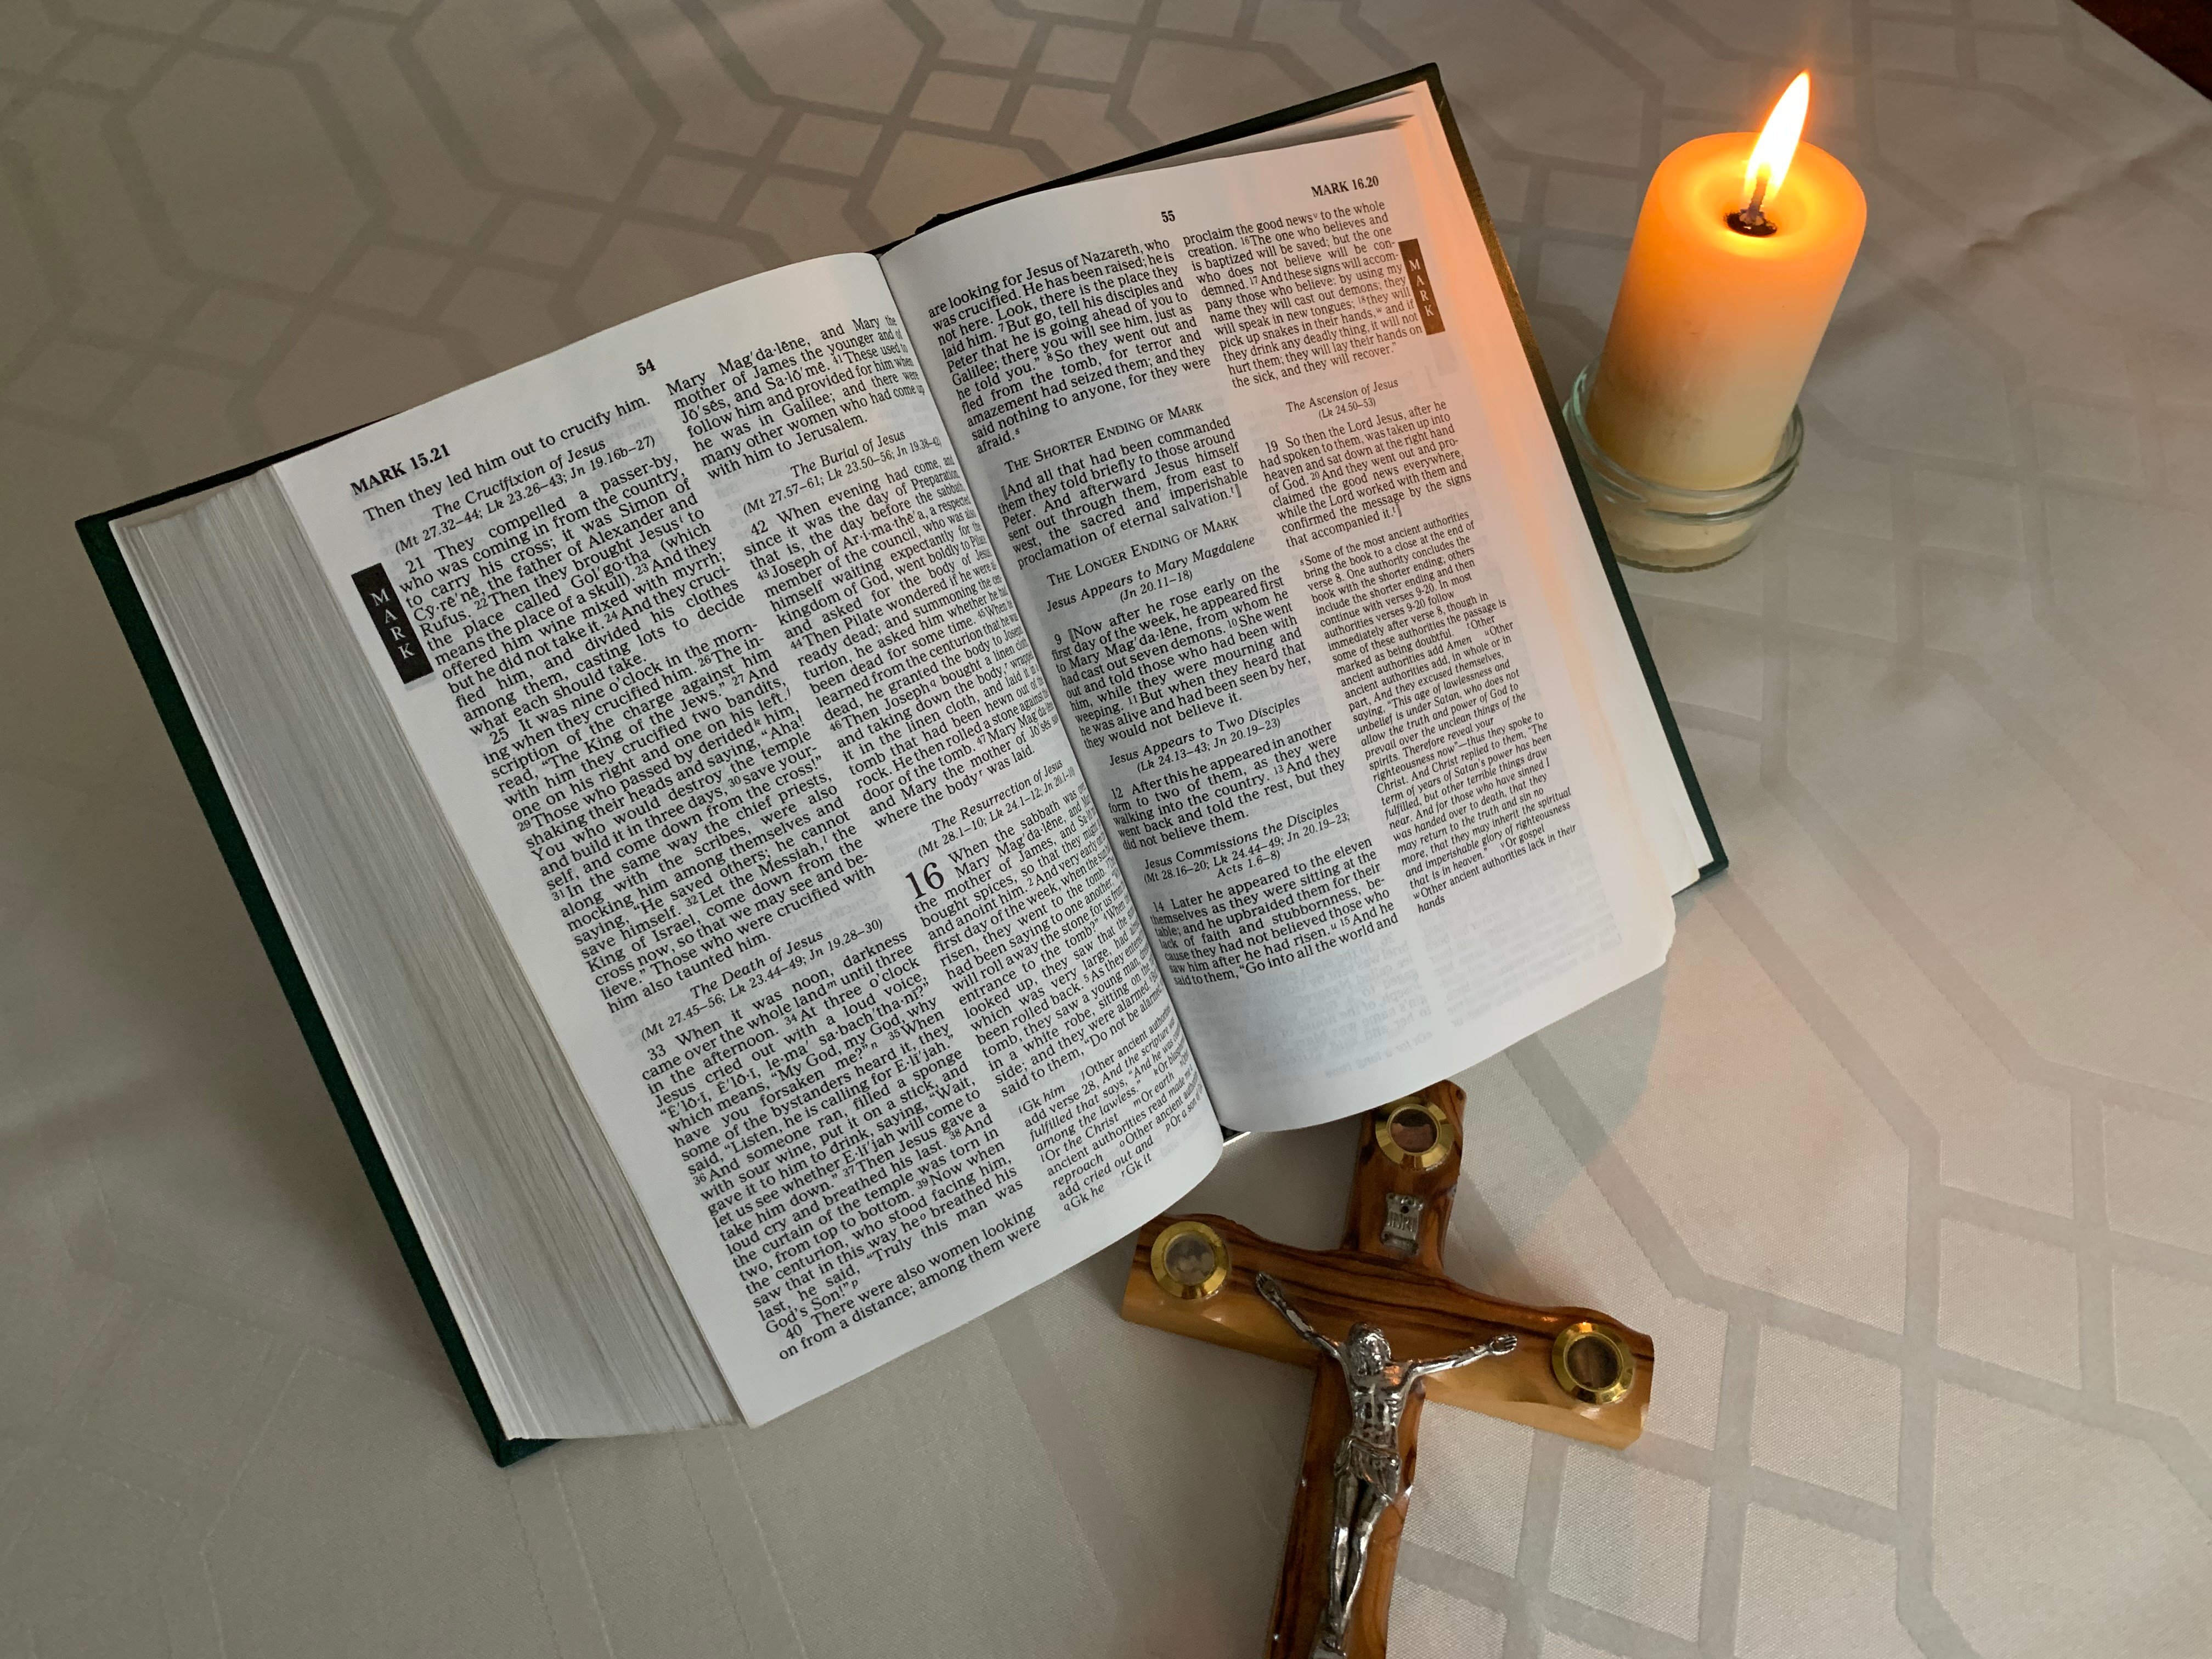 An image of a bible, together with a lit candle and a cross